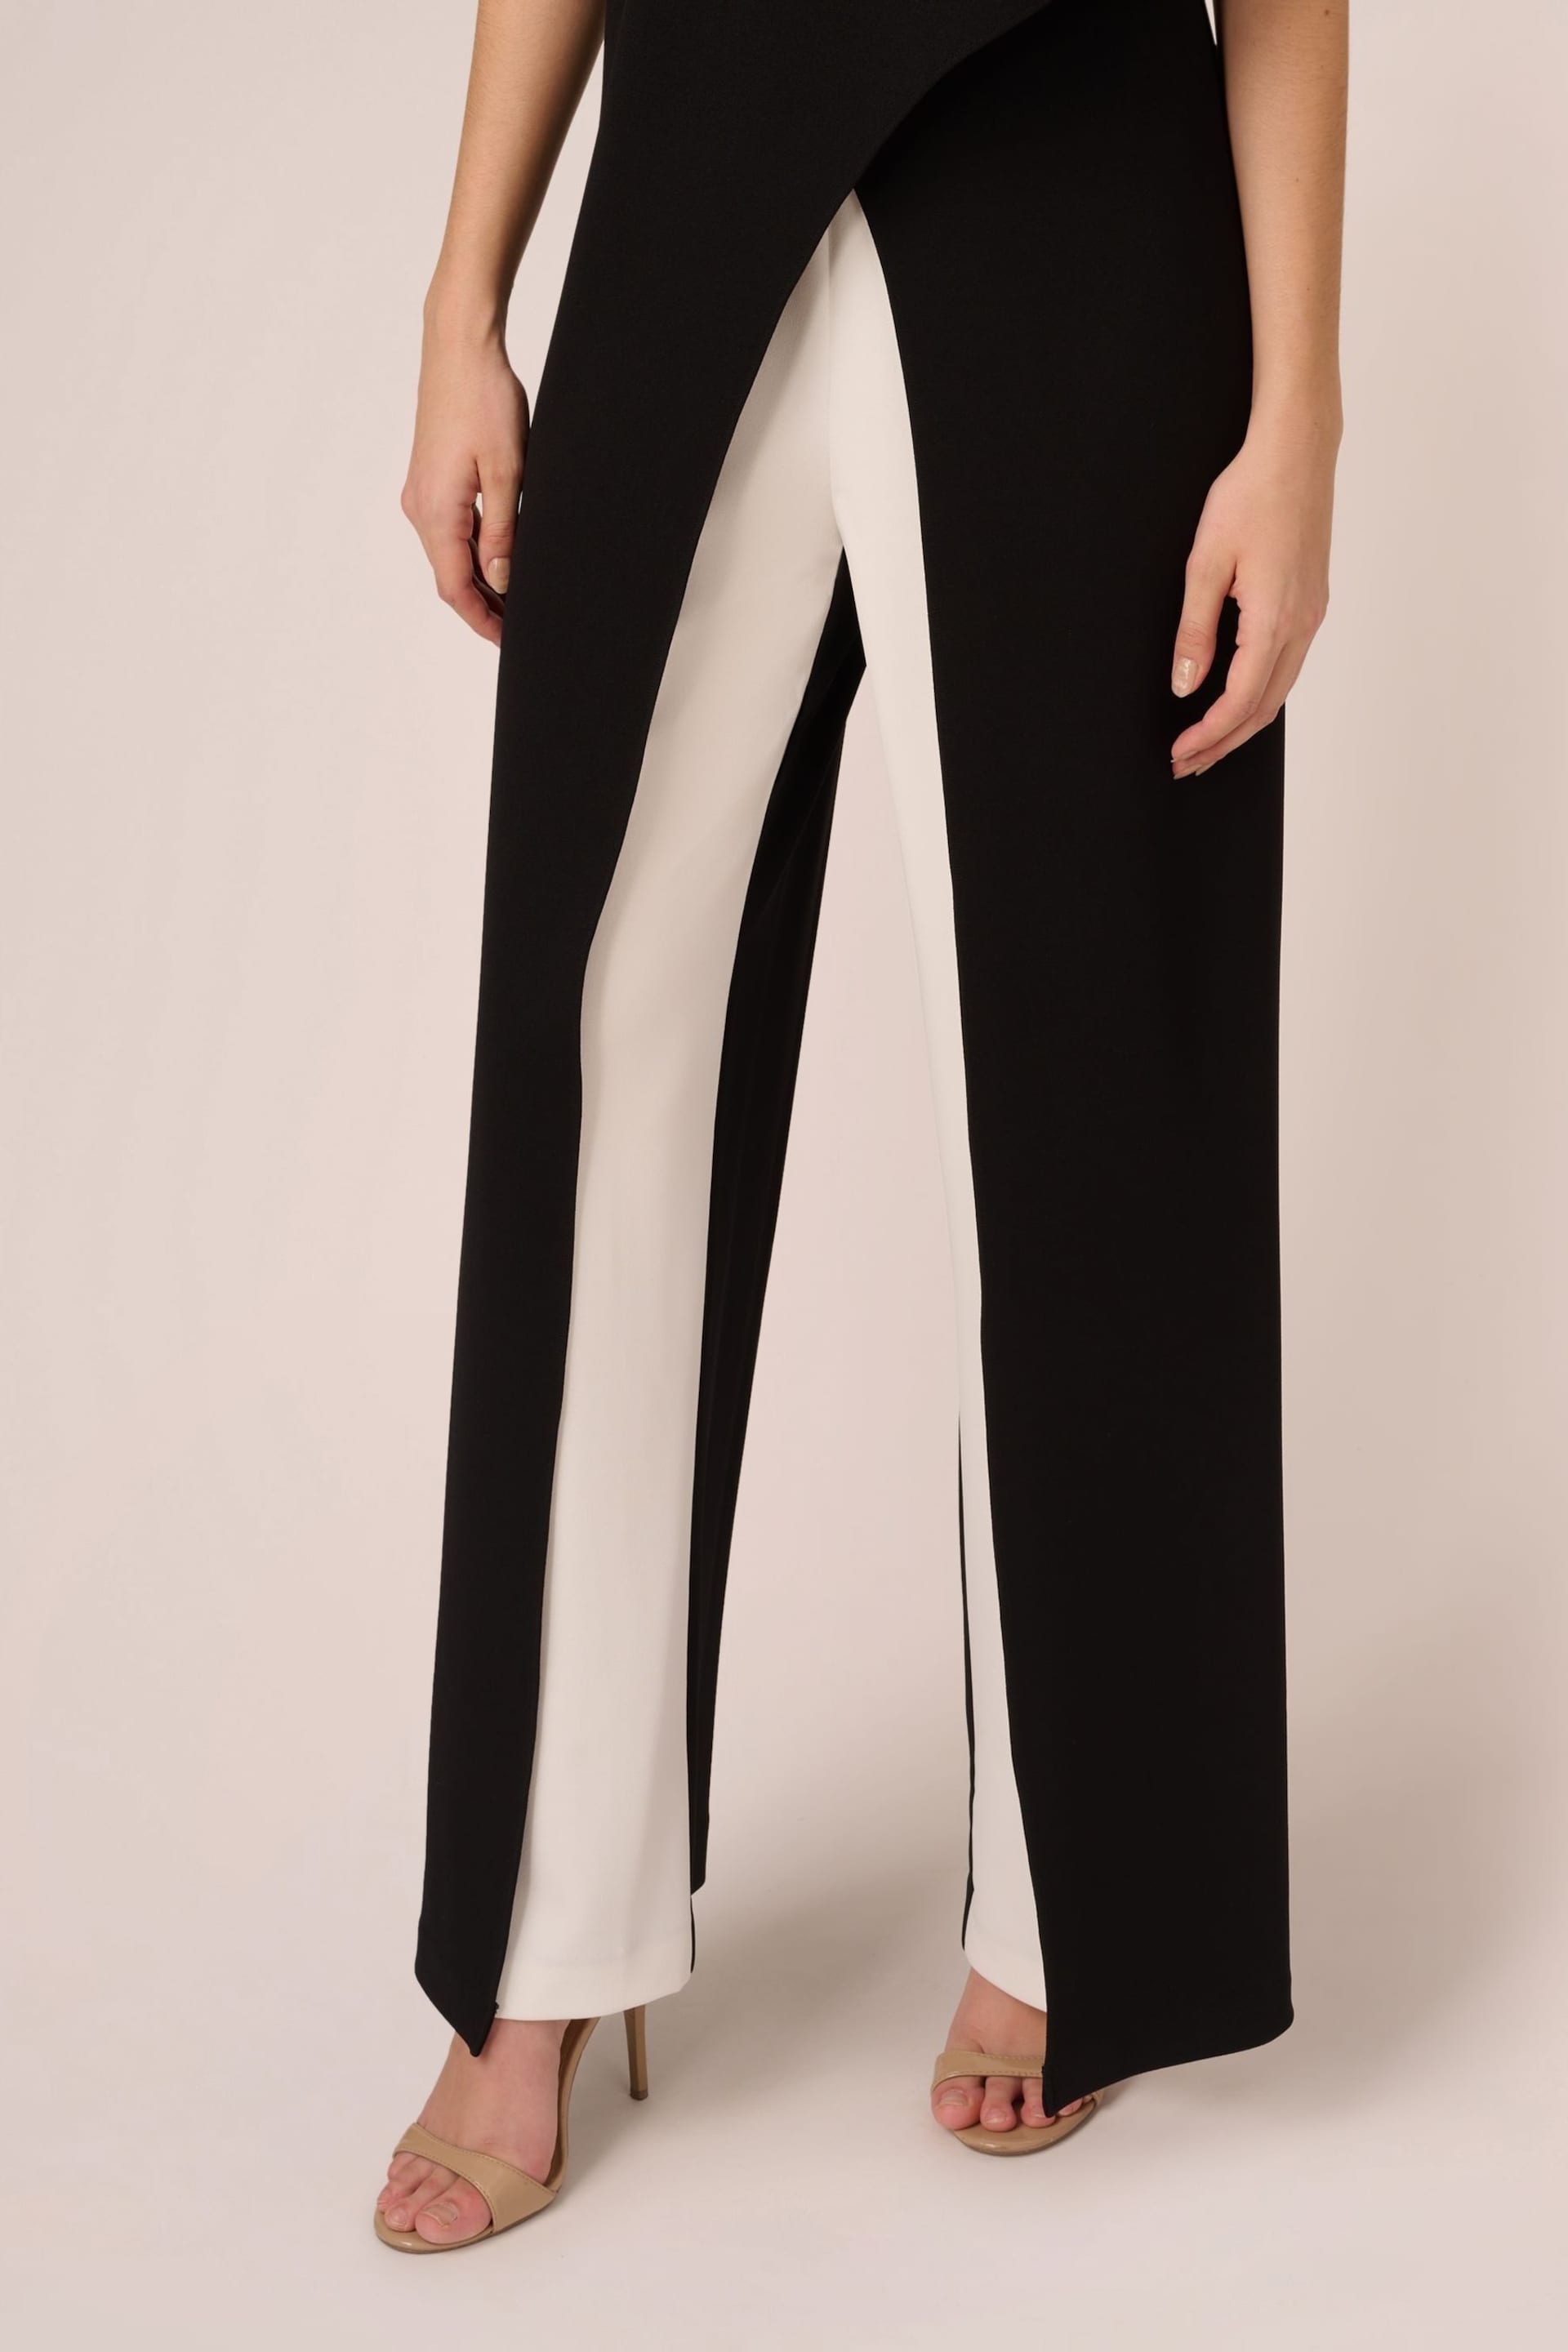 Adrianna Papell Colorblock Overlay Black Jumpsuit - Image 6 of 7